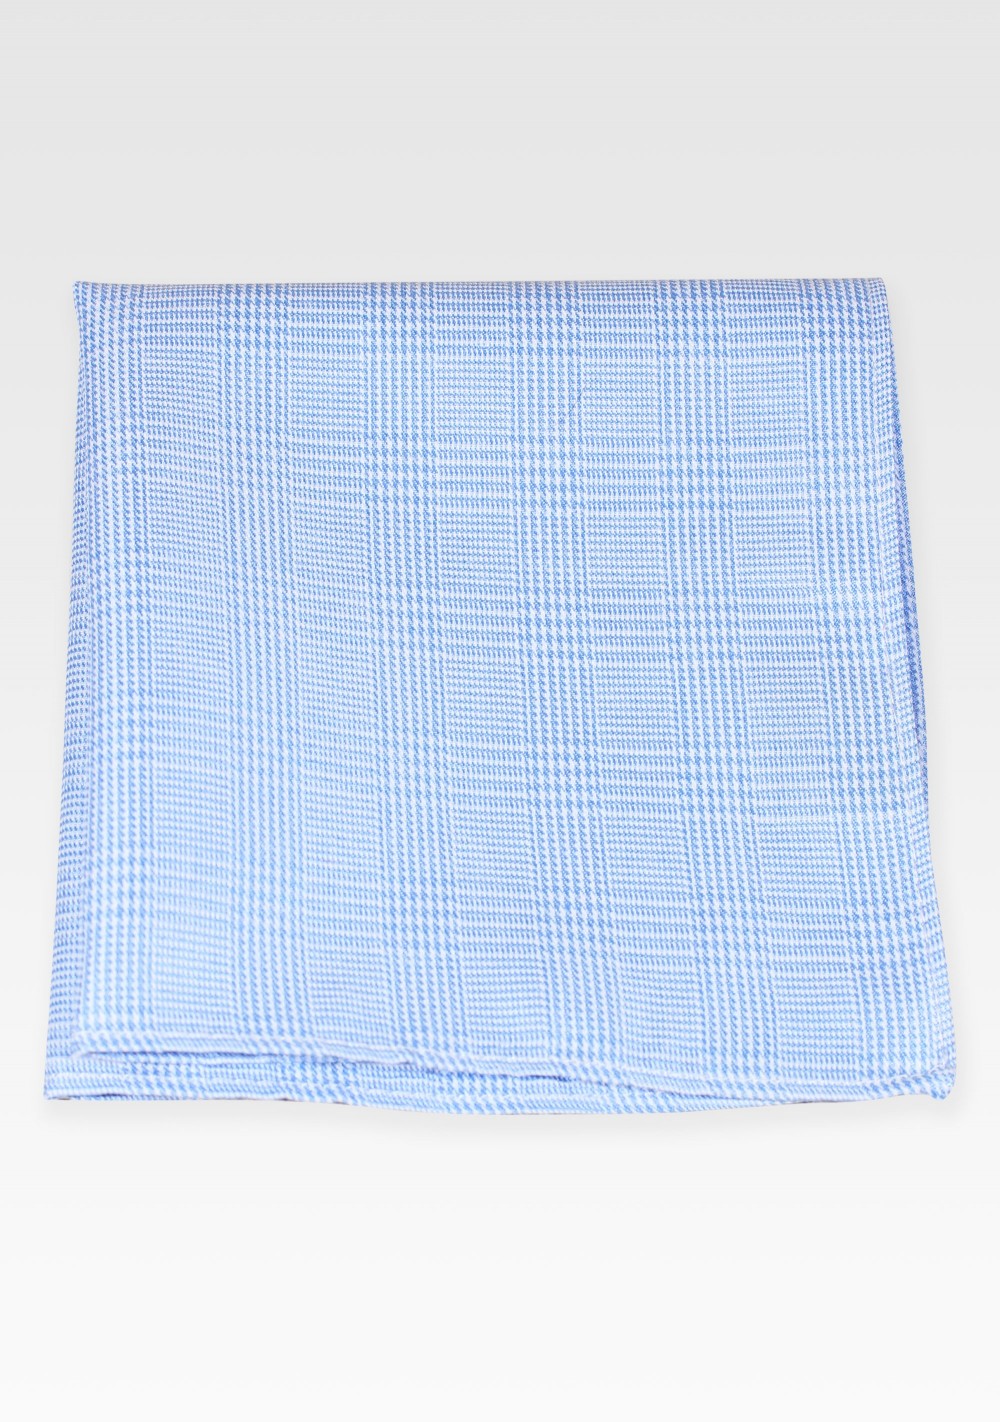 Prince of Wales Check Cotton Hanky in Light Blue